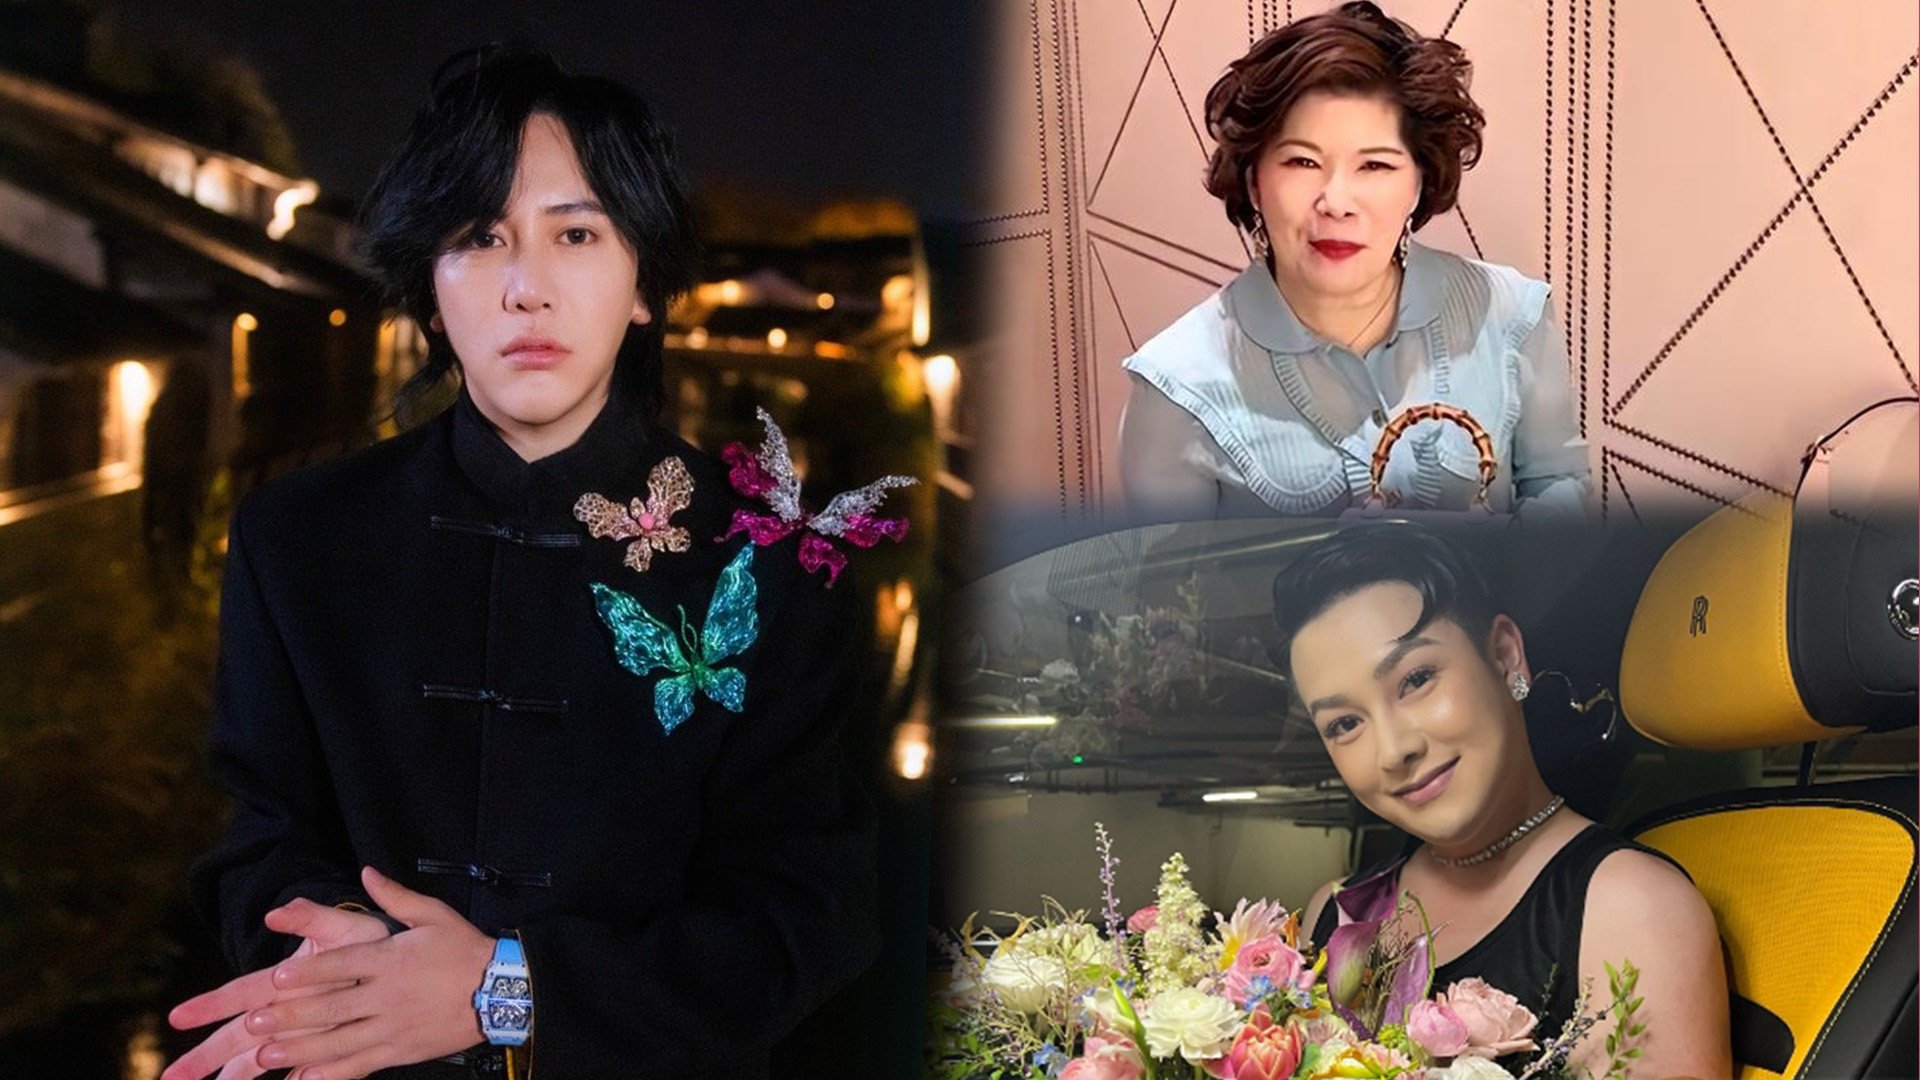 In the wake of a crackdown on errant traditional celebrities, the authorities in China have turned their attention to wealth-flaunting online celebrities. The Post looks at three high-profile KOLs caught in the cross hairs. Photo: SCMP composite/Weibo

